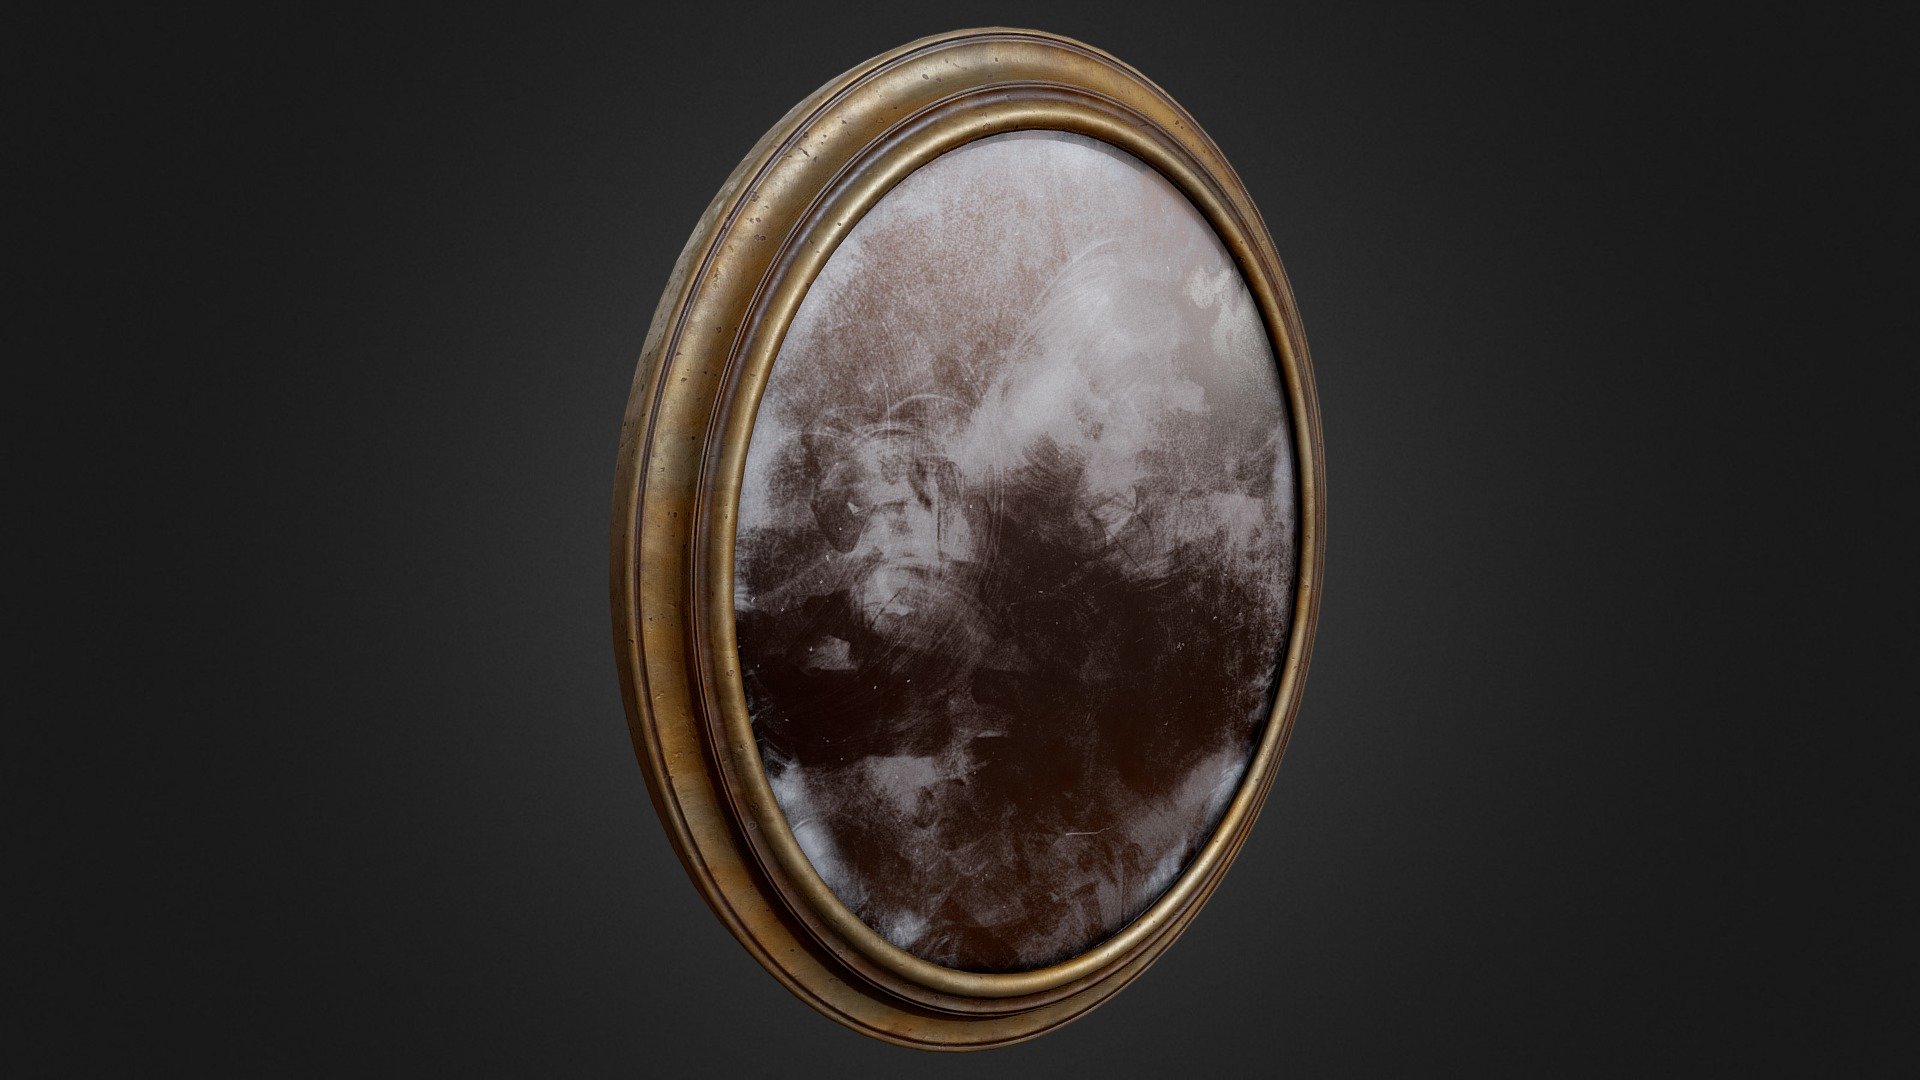 Old Mirror for my Horror Bedroom Pack. It will also be included in my Horror Bedroom Asset Pack for UE5.

For more of my work you can look here

Important/Additional Notes: If you encounter problems or have further questions or suggestions you can drop me an email at timgames52@gmail.com


Technical Details
Texture Sizes:




All Textures are 4096x4096

Vertex Count Combined:  1904 (3580 - Tris)

Format: fbx

LODs included: No

Number of Meshes: 1

Number of Textures: 5

Artstation Link with images 3d model